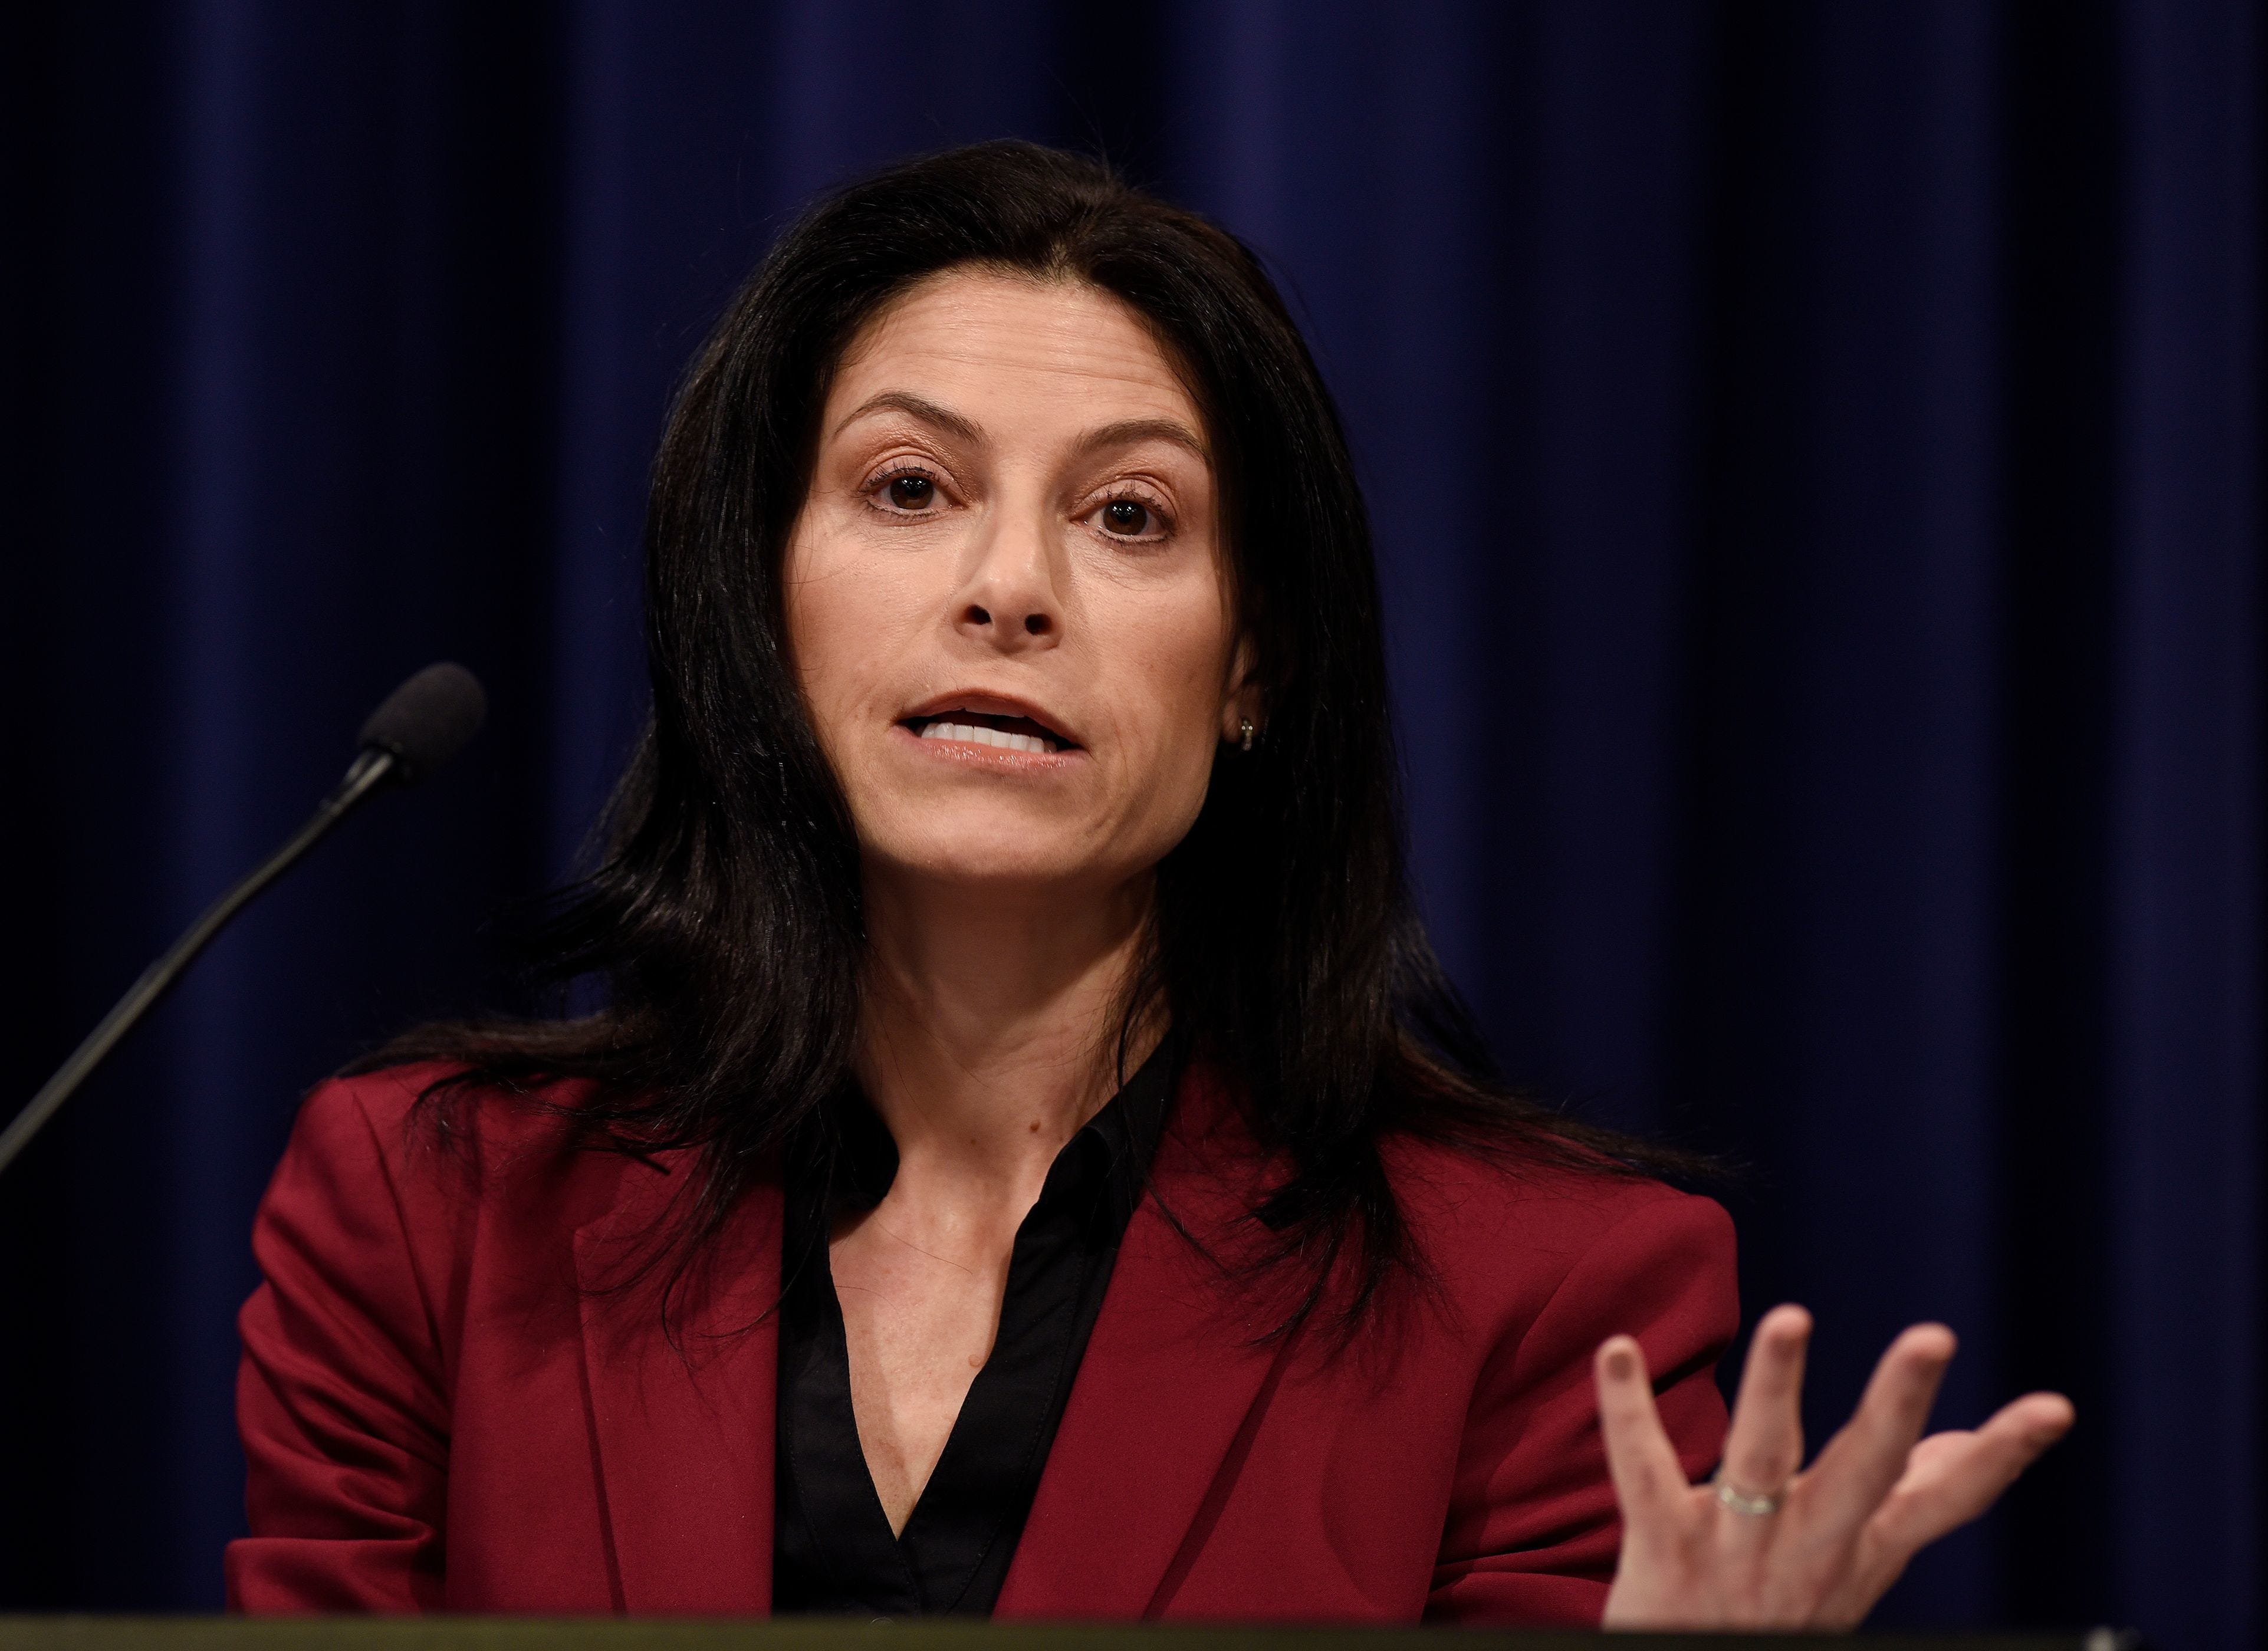 The statement from Attorney General Dana Nessel's office is a blow to the governor, who has been insisting for the last two months that she had no choice but to close Benton Harbor High School in order to save the school district, Thompson says.